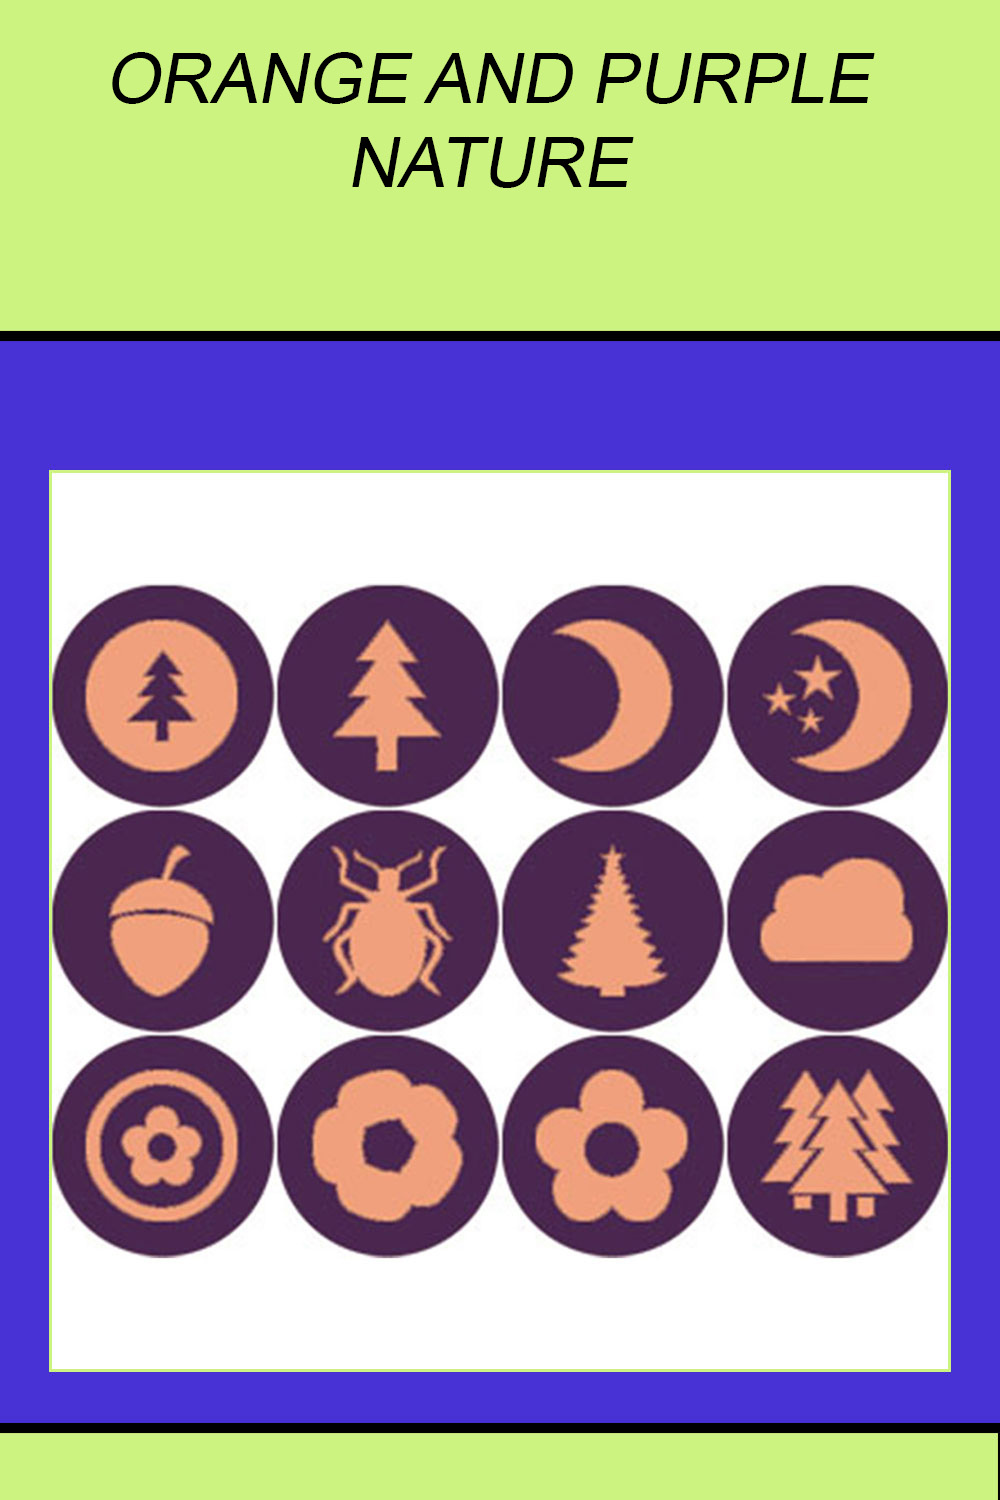 ORANGE AND PURPLE NATURE ROUND ICONS pinterest preview image.